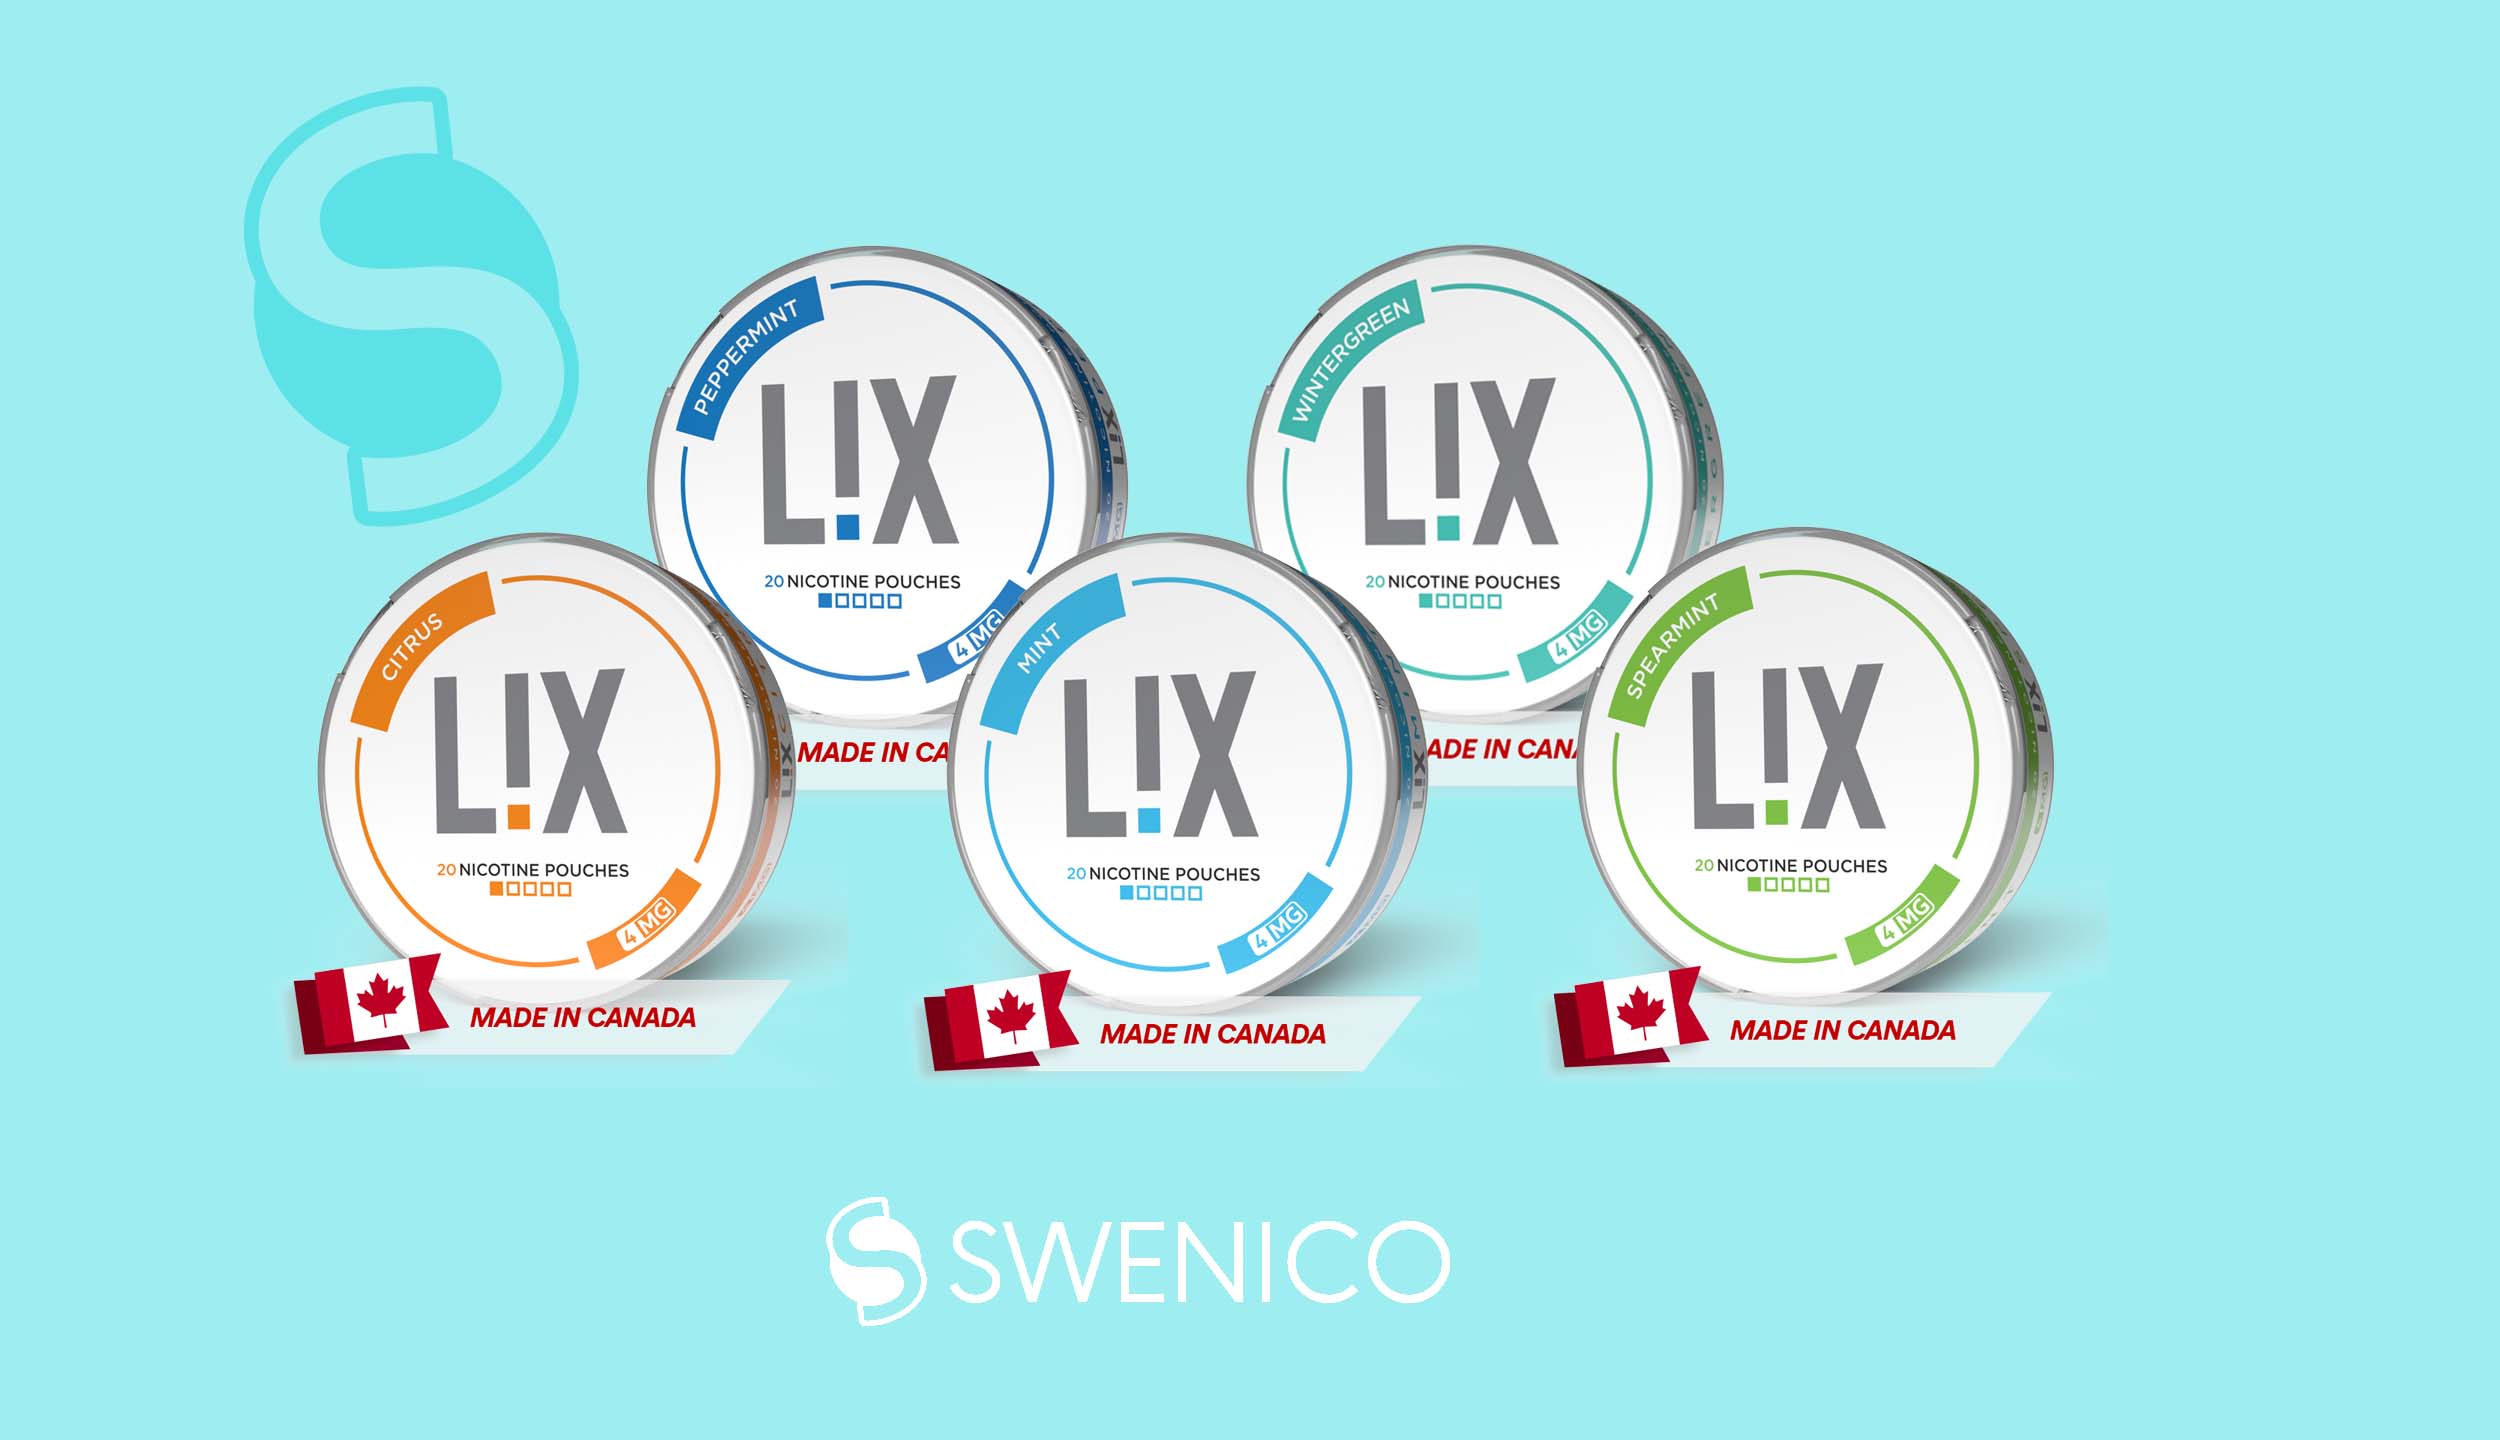 L!X Nicotine Pouches – Made in Canada